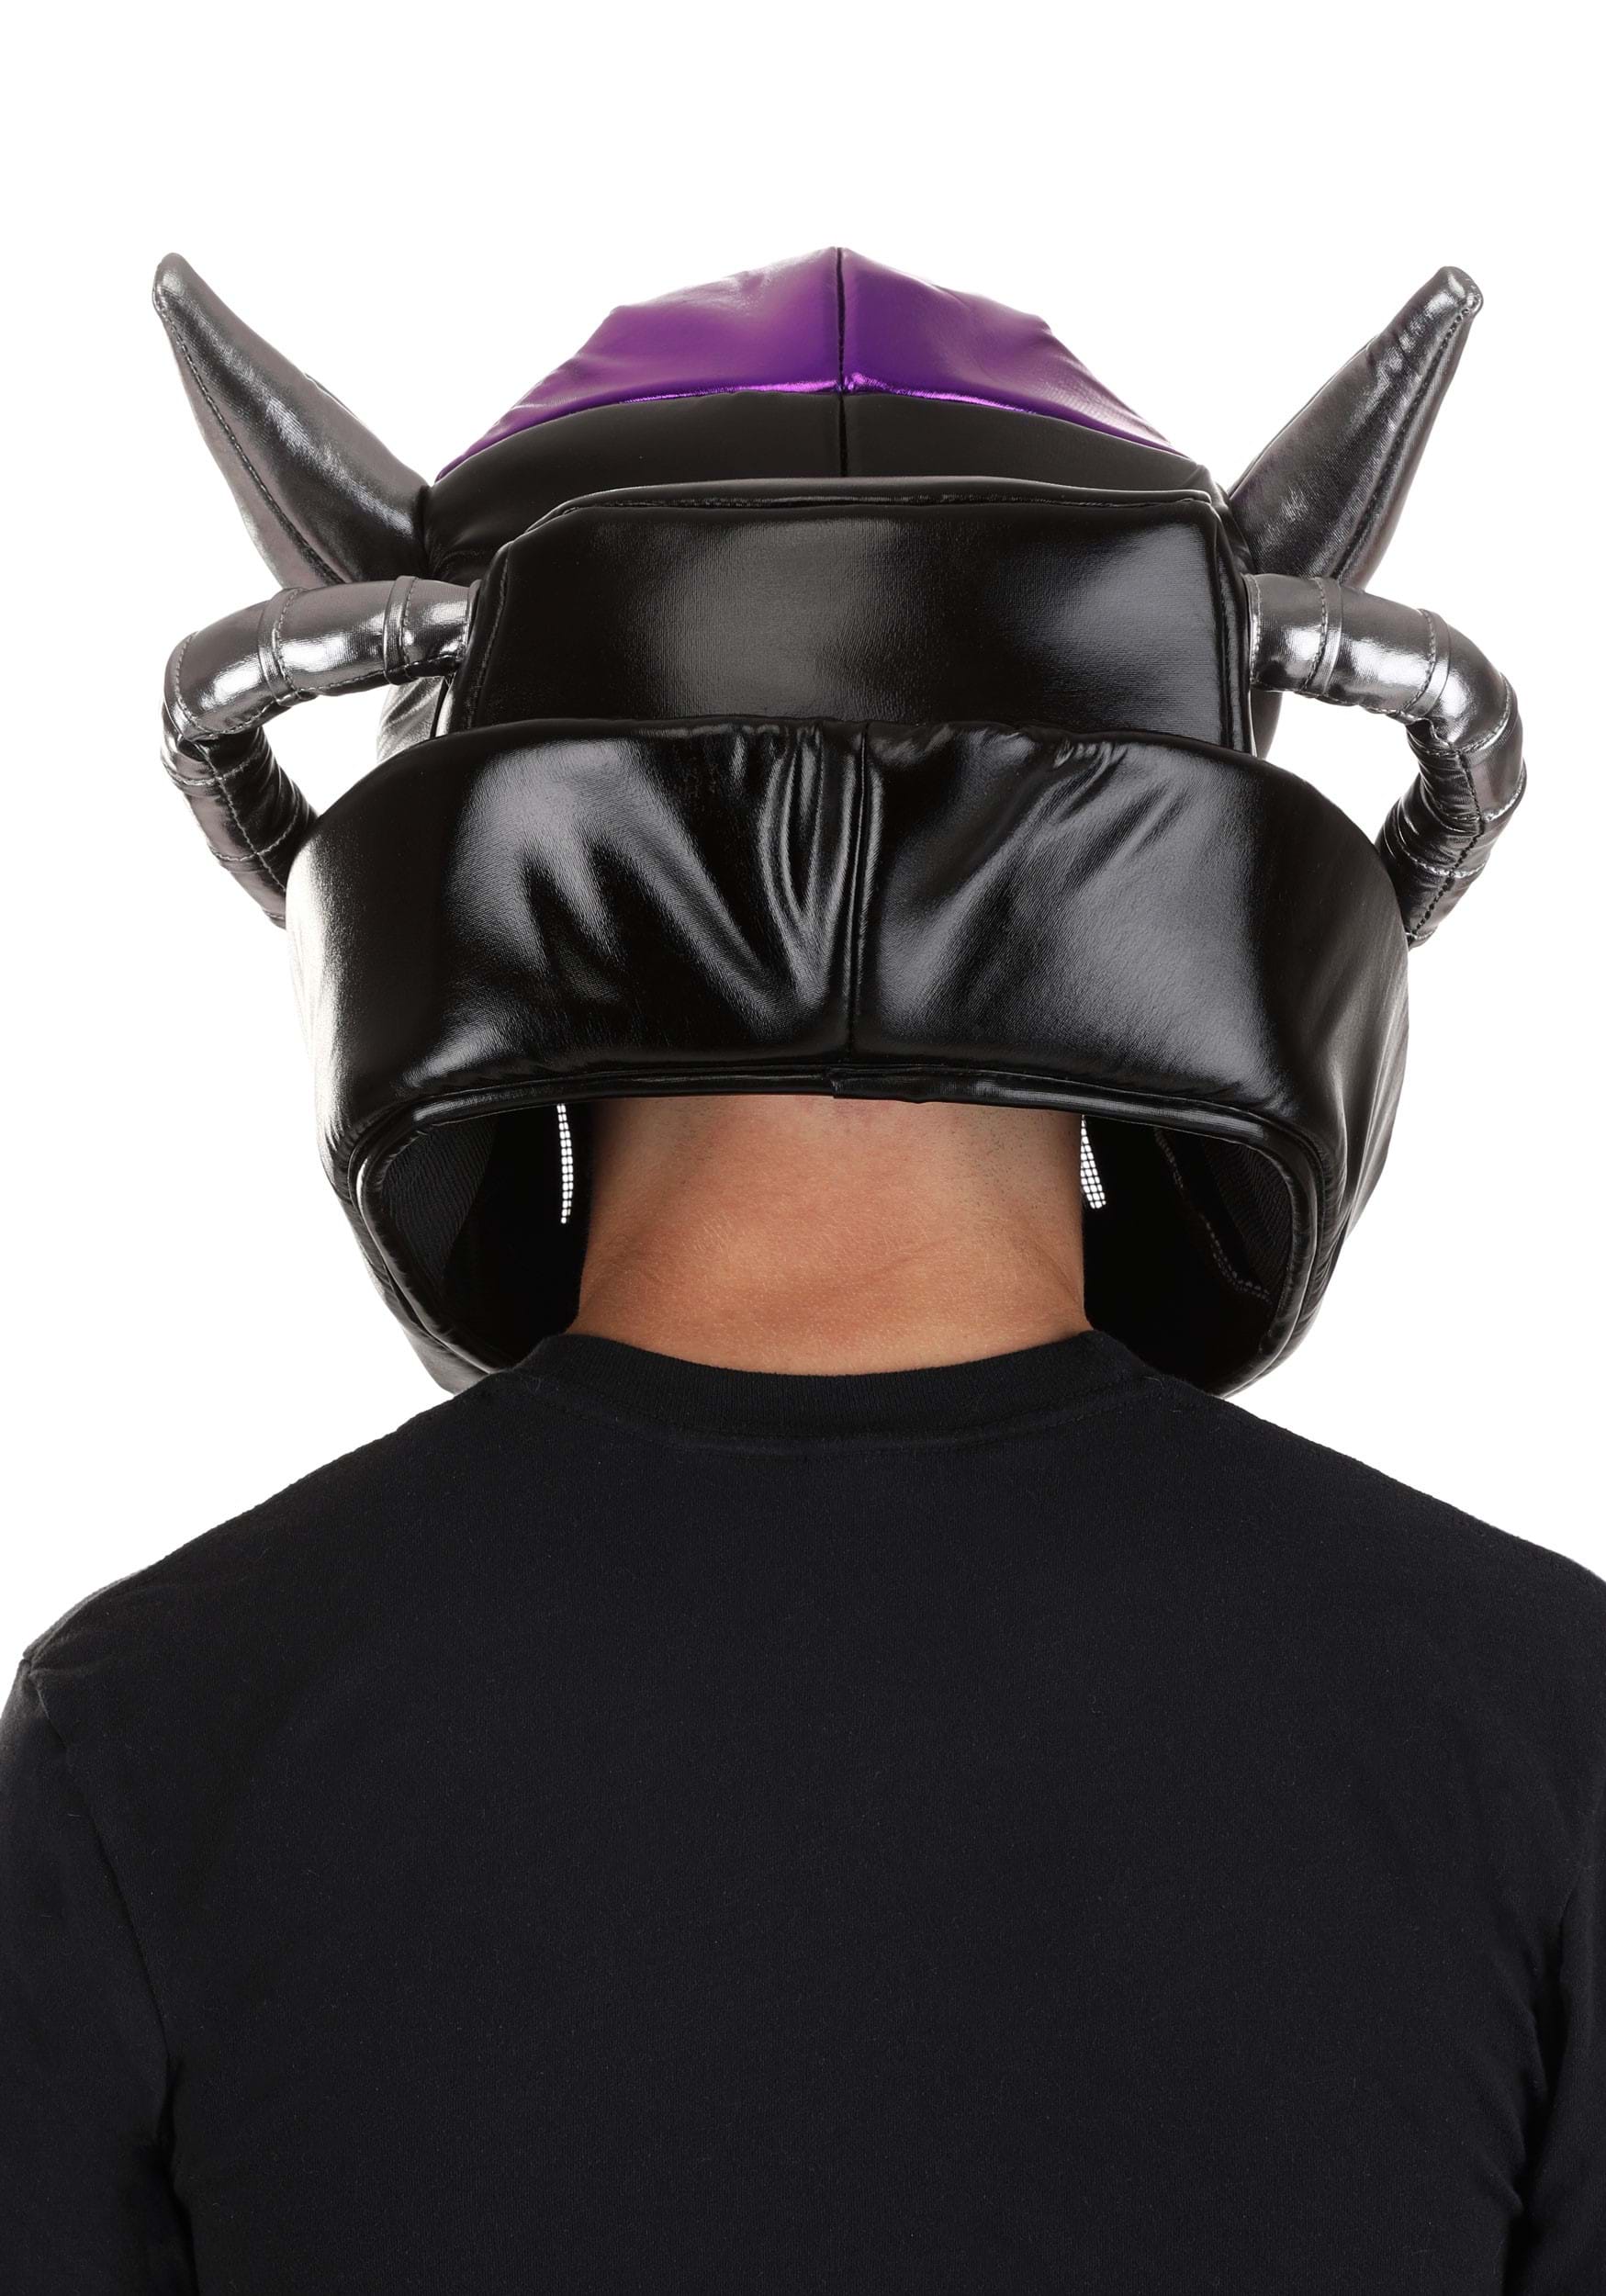 Zurg Full-Head Mask for Adults | Adult | Unisex | Black/Purple/Gray | One-Size | FUN Costumes